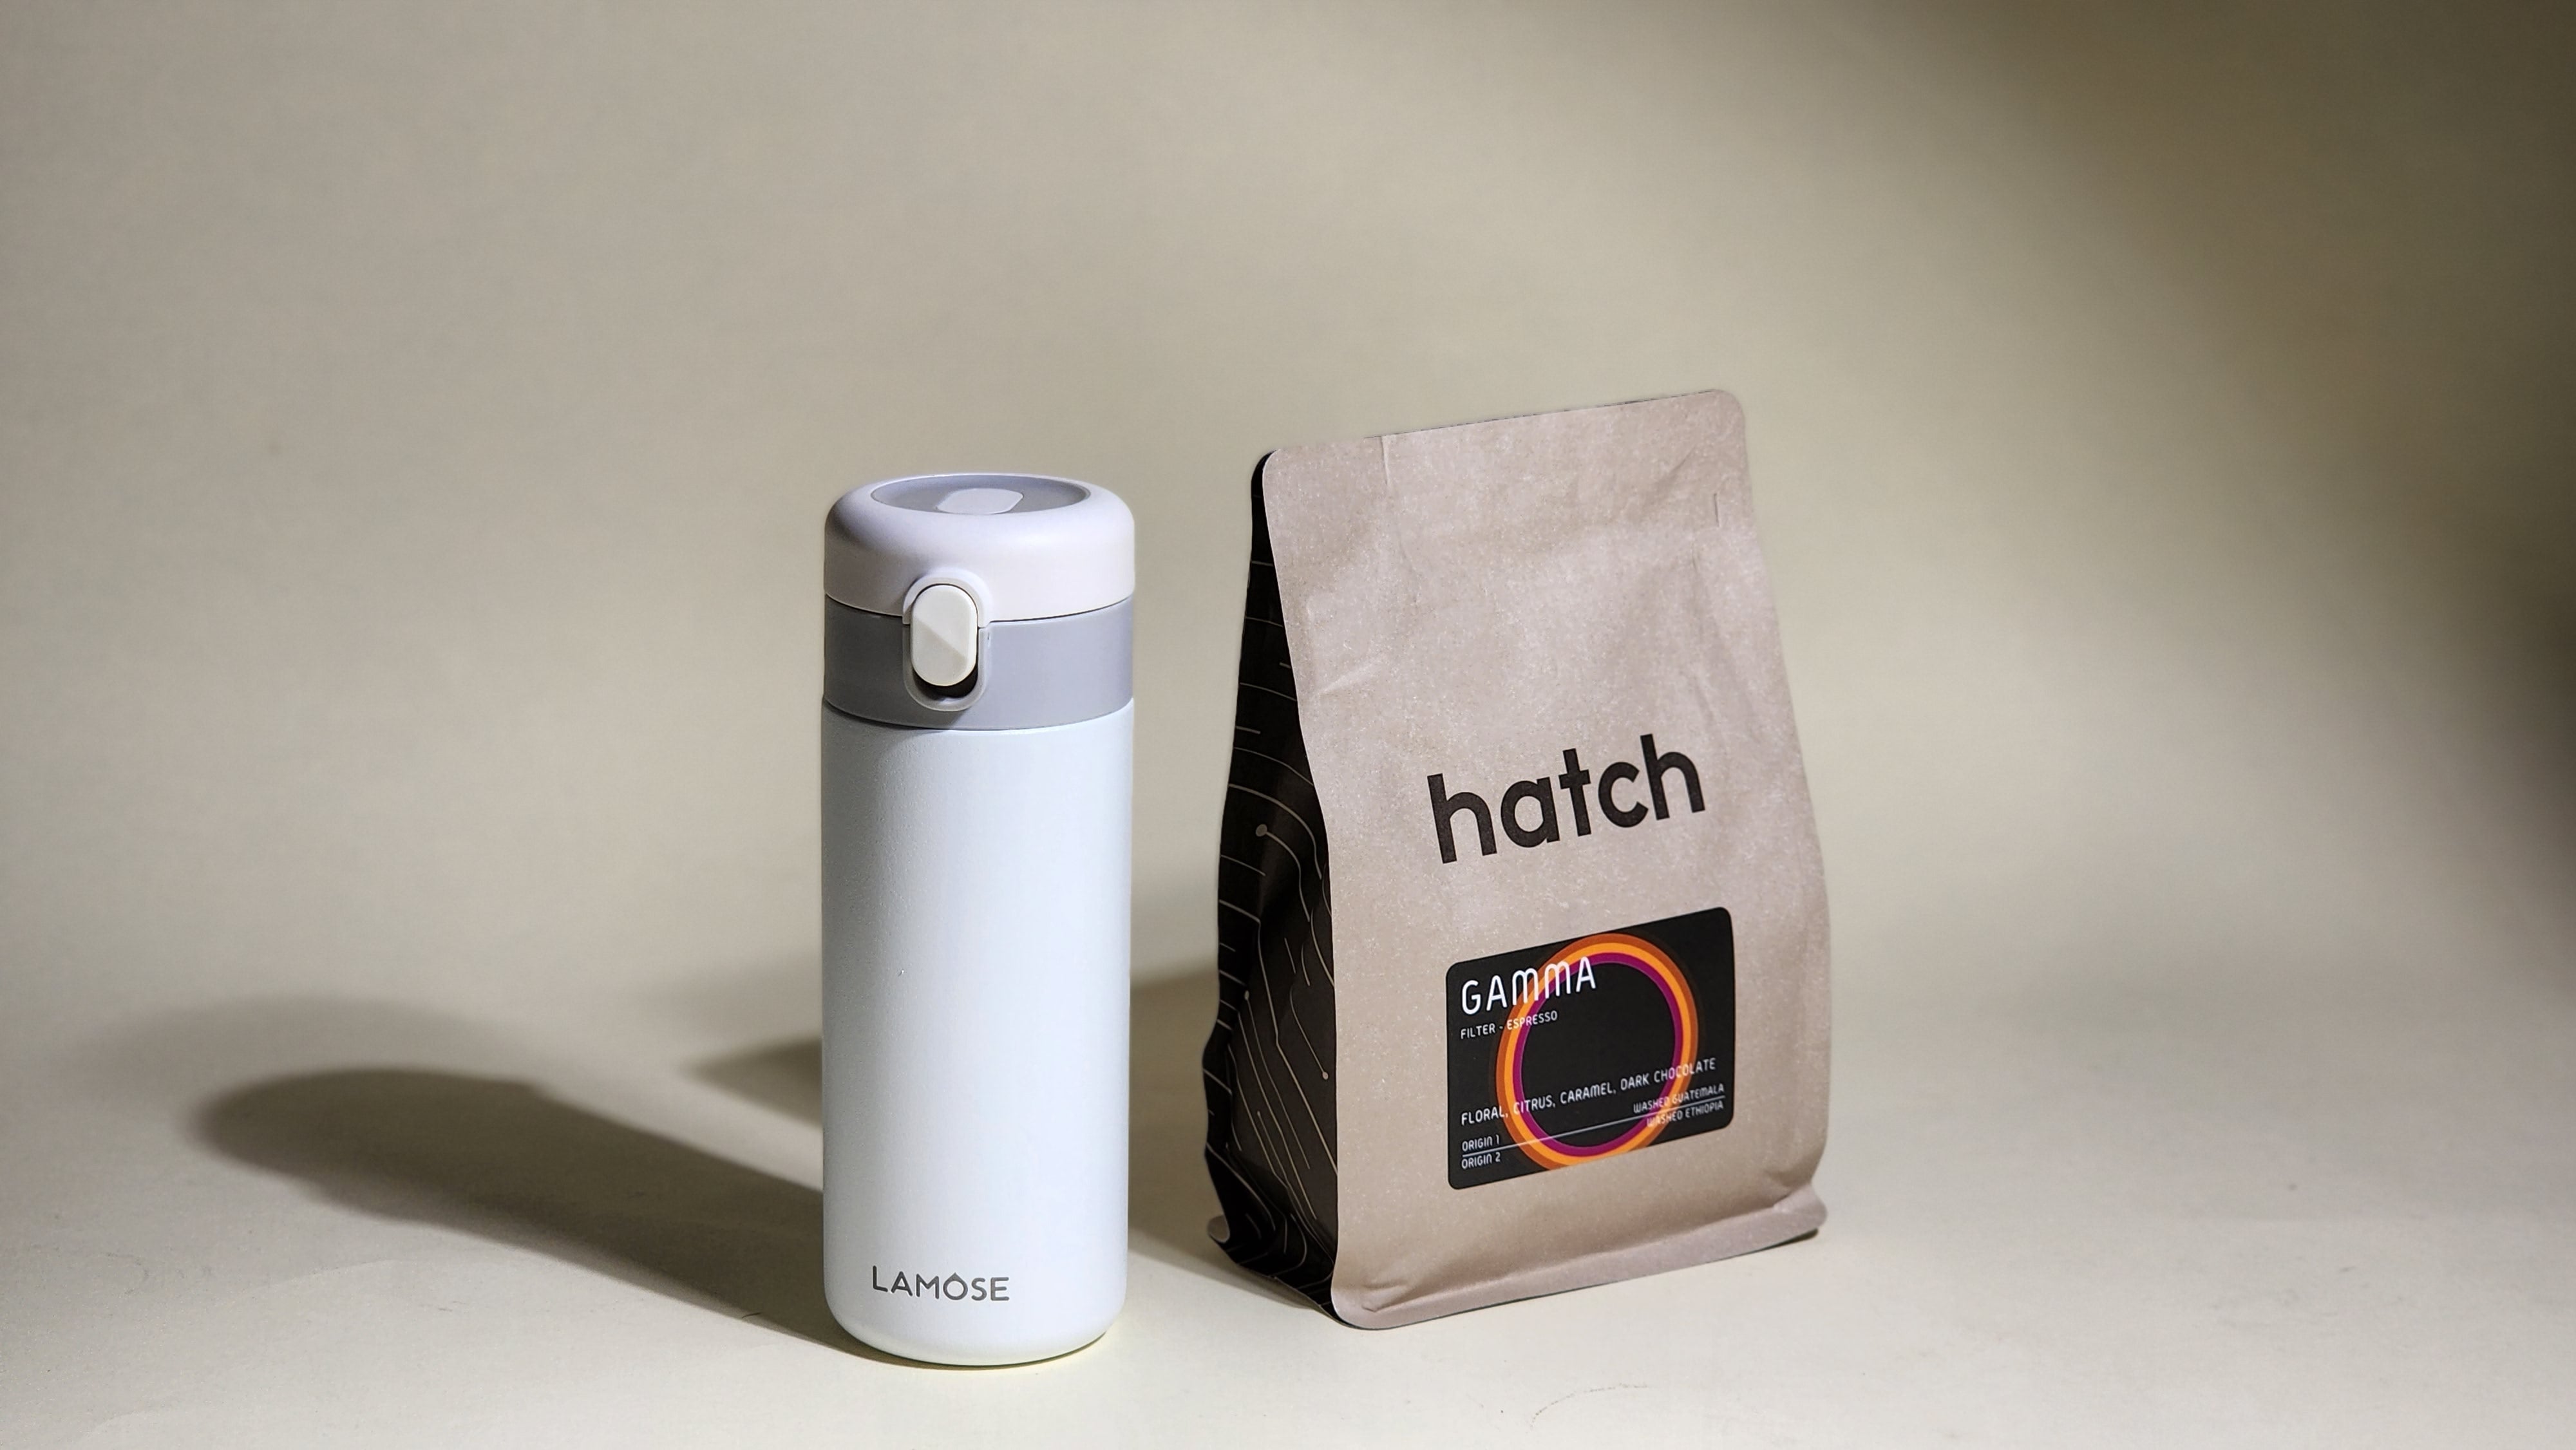 Hatch Coffee - Gamma: A tribute to Northern Italian espresso, balancing vibrant acidity with a chocolatey finish. Crafted from Guatemala and Ethiopia beans, with floral, citrus, caramel, and dark chocolate notes. Ideal for espresso brewing. Explore our core coffee offerings: Supernova, Starlight, Gamma, and Blackout blends.